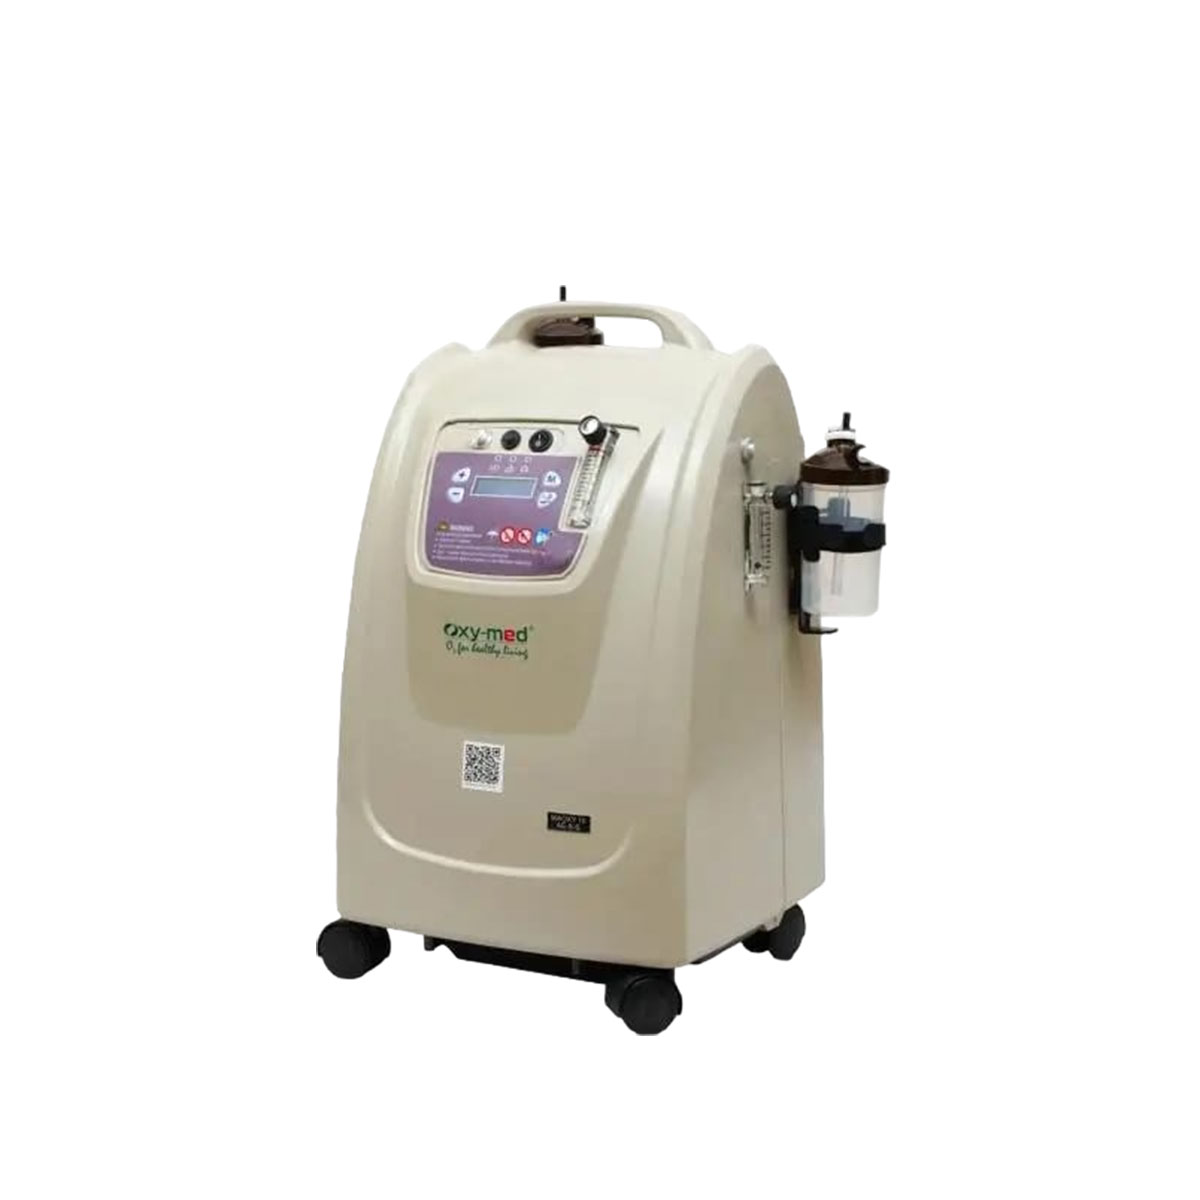 10 Lpm Oxymed Oxygen Concentrator On Sale Suppliers, Service Provider in Ashok park